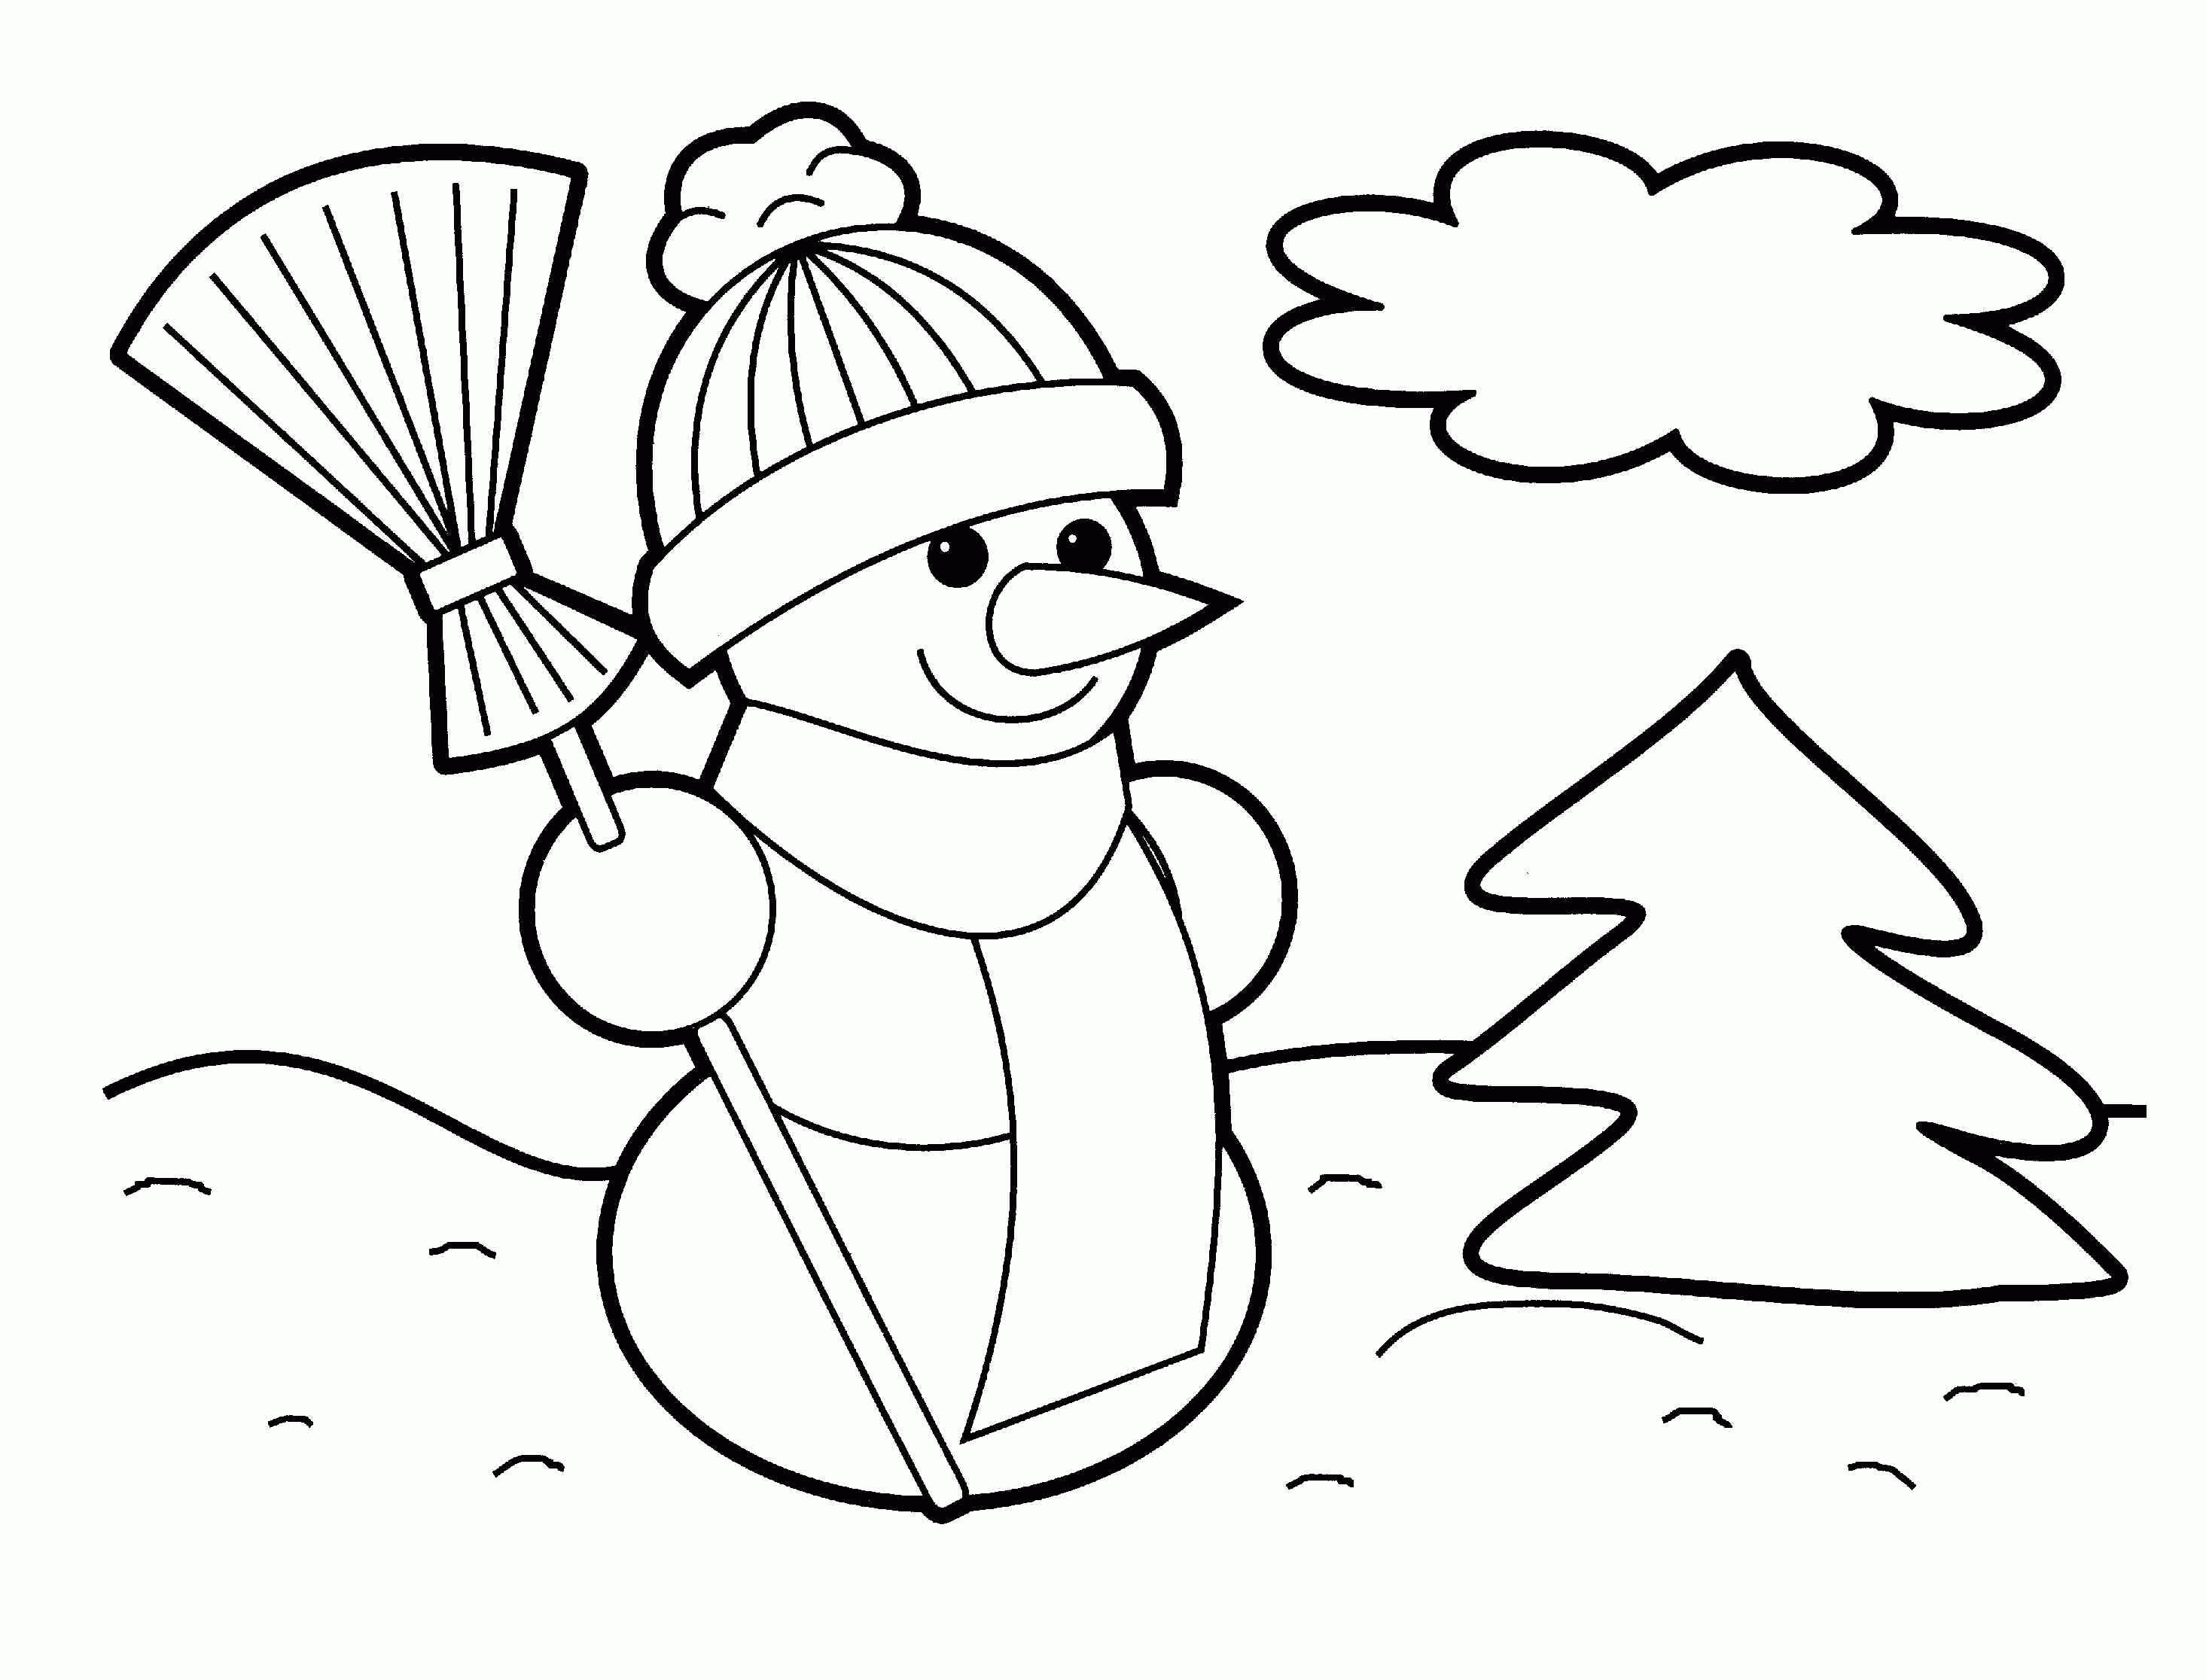 Free Printable Christmas Coloring Page - Coloring Page Photos